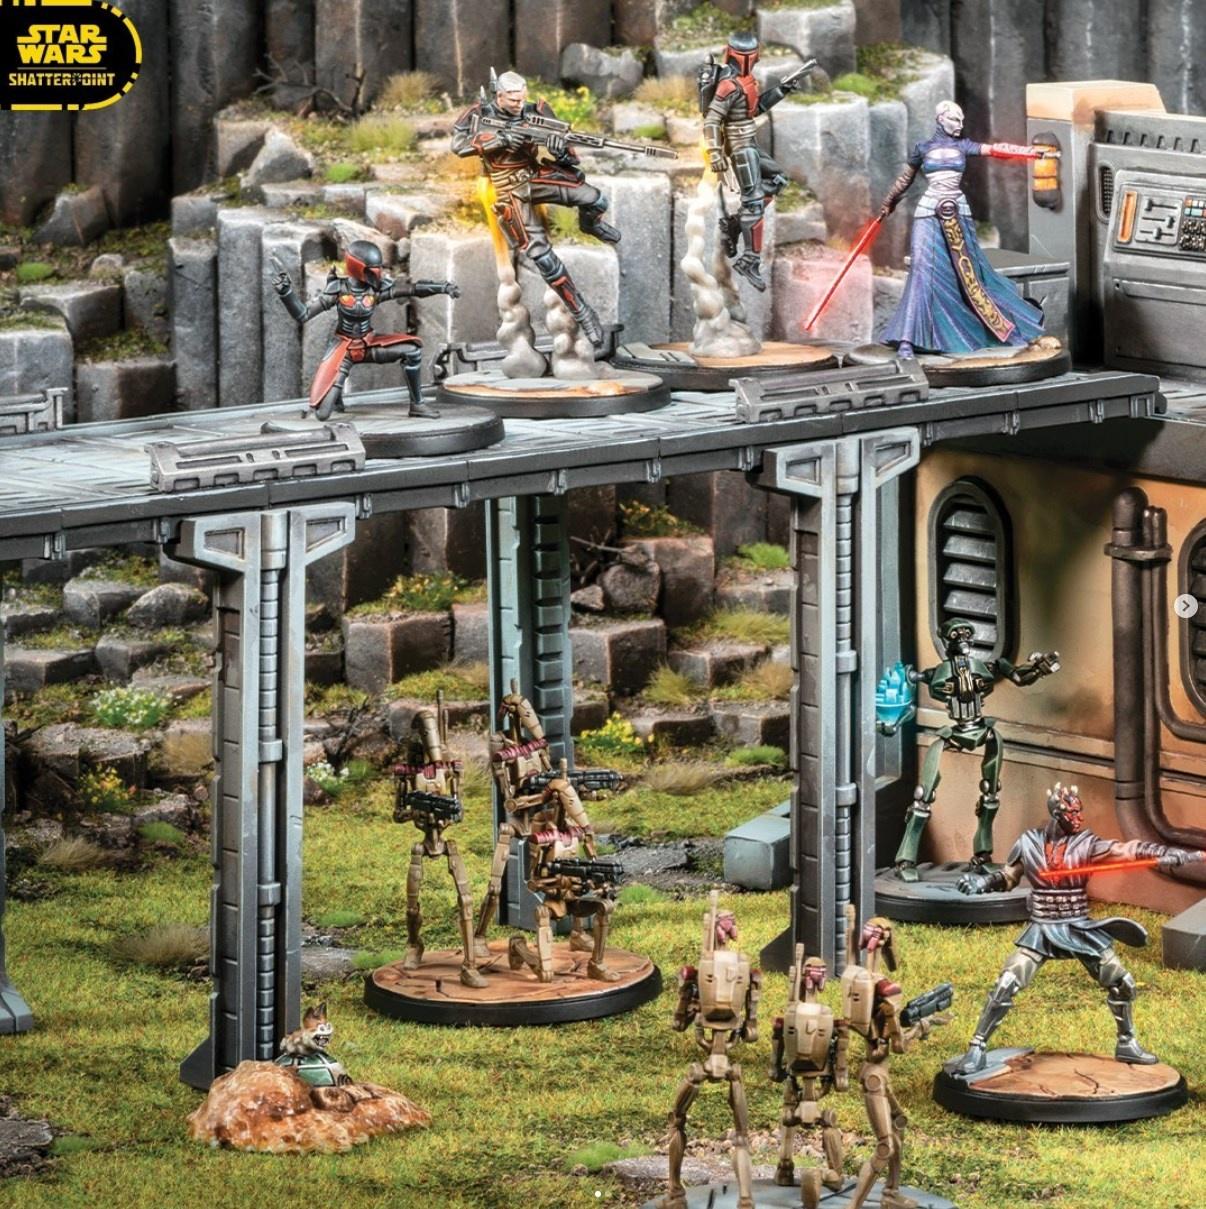 Star Wars: Shatterpoint - High Ground Terrain Pack – Undiscovered Realm